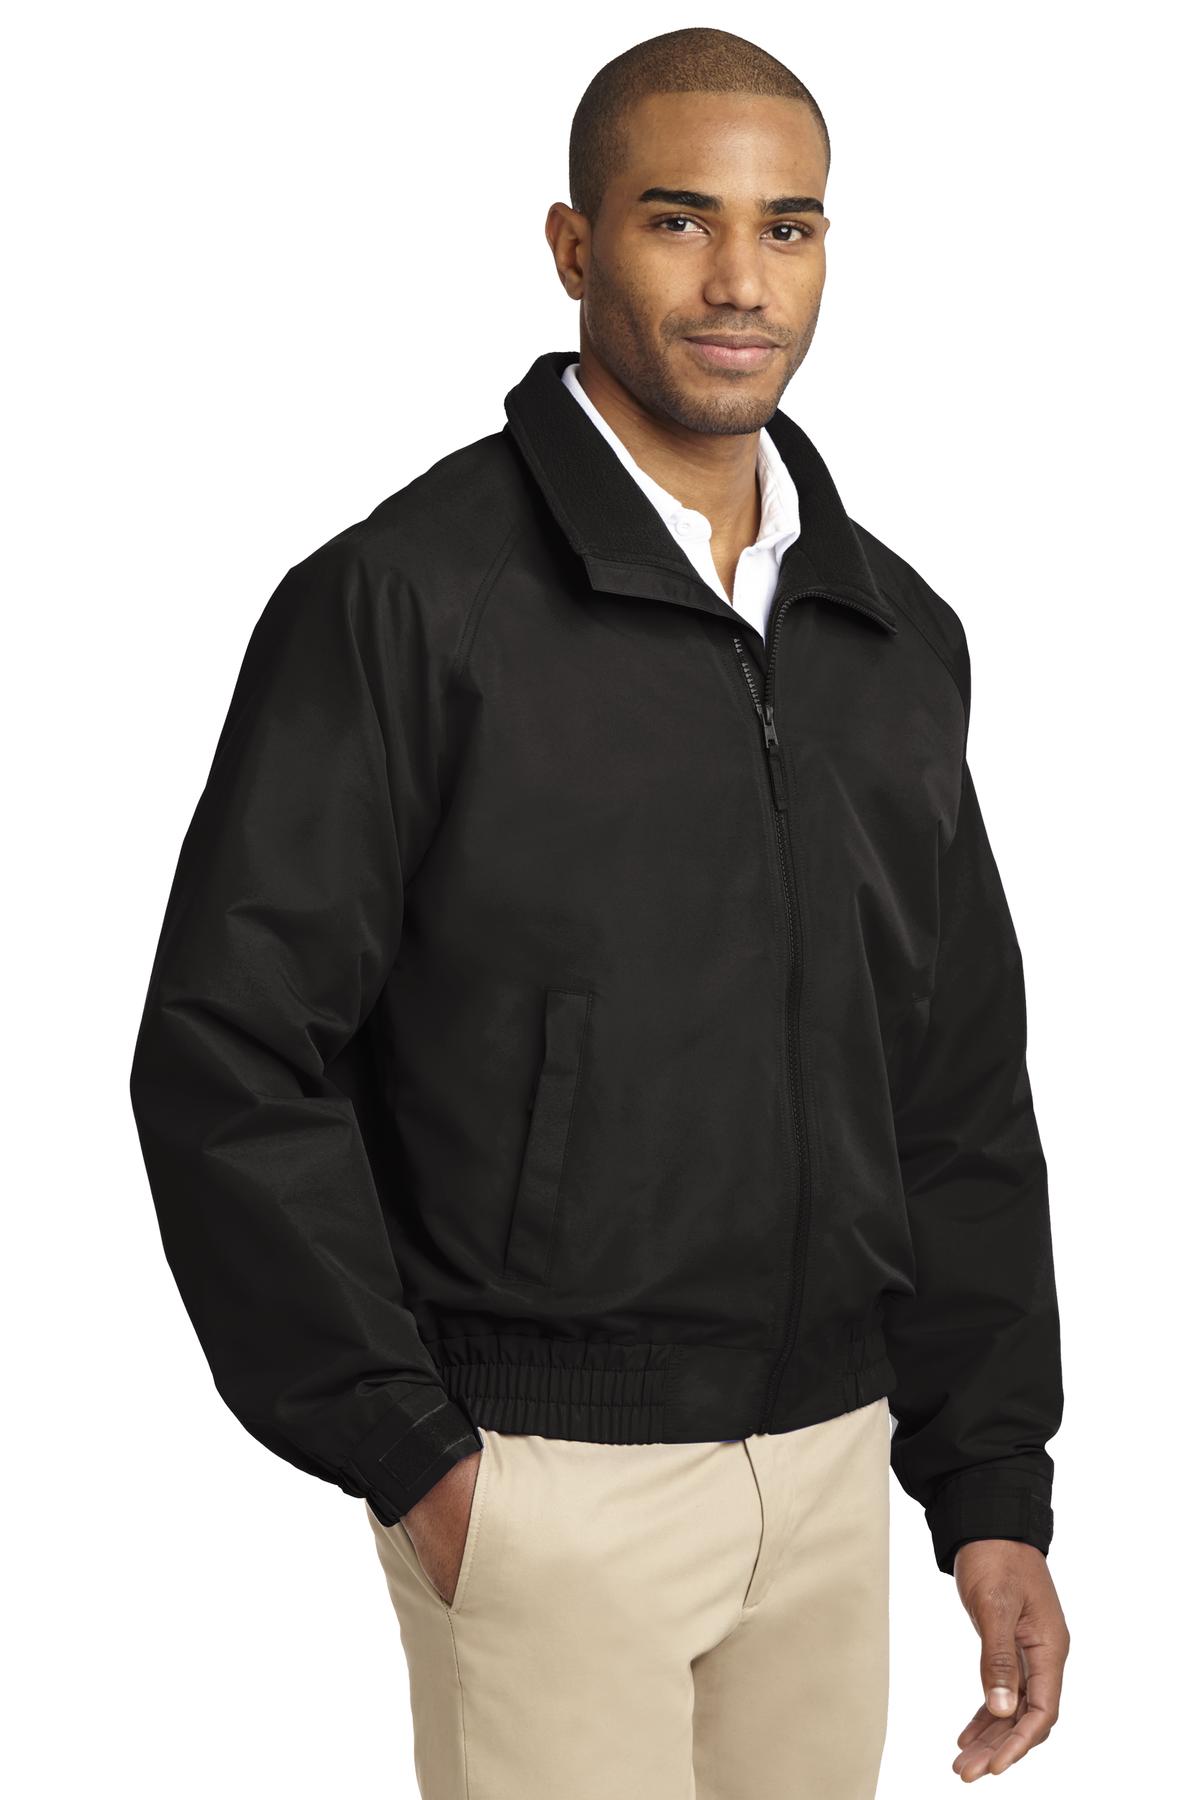 Port Authority Lightweight Charger Jacket-XL (True Black) - image 4 of 5